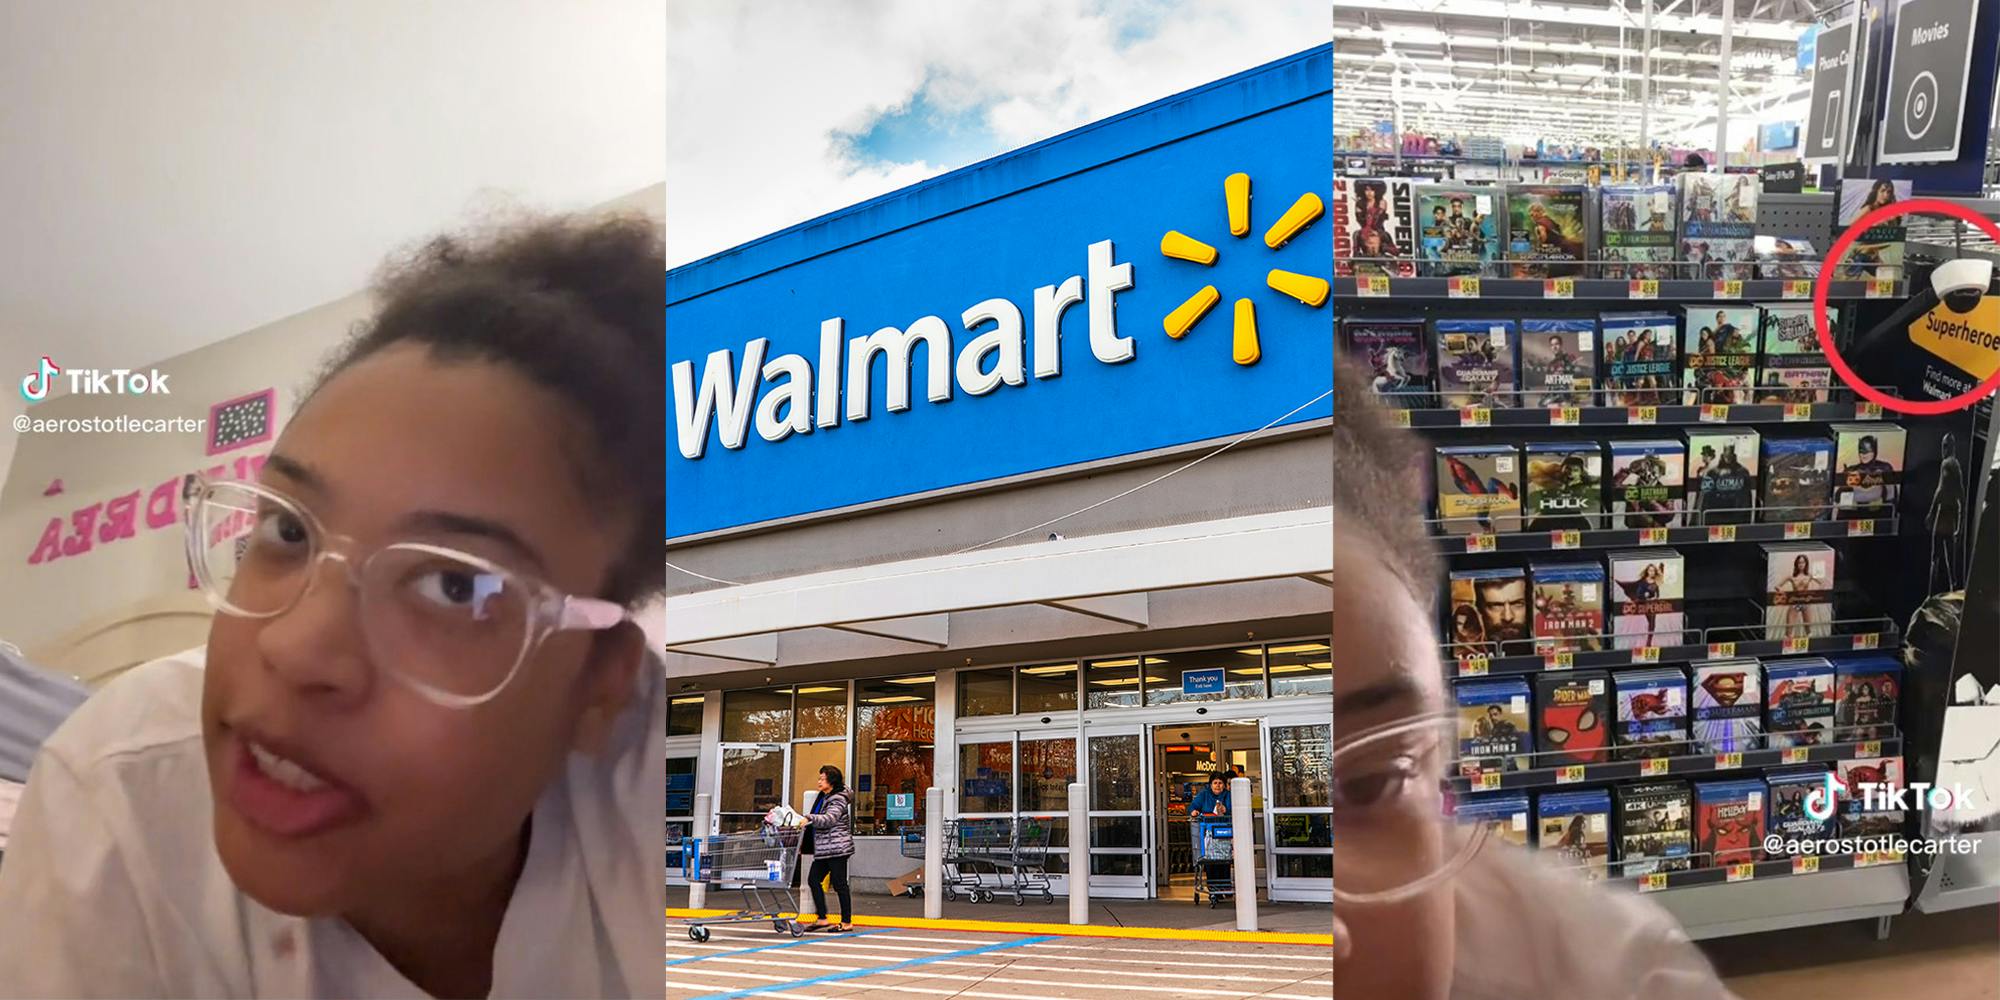 ajayi temitayo recommends hidden cameras in walmart pic